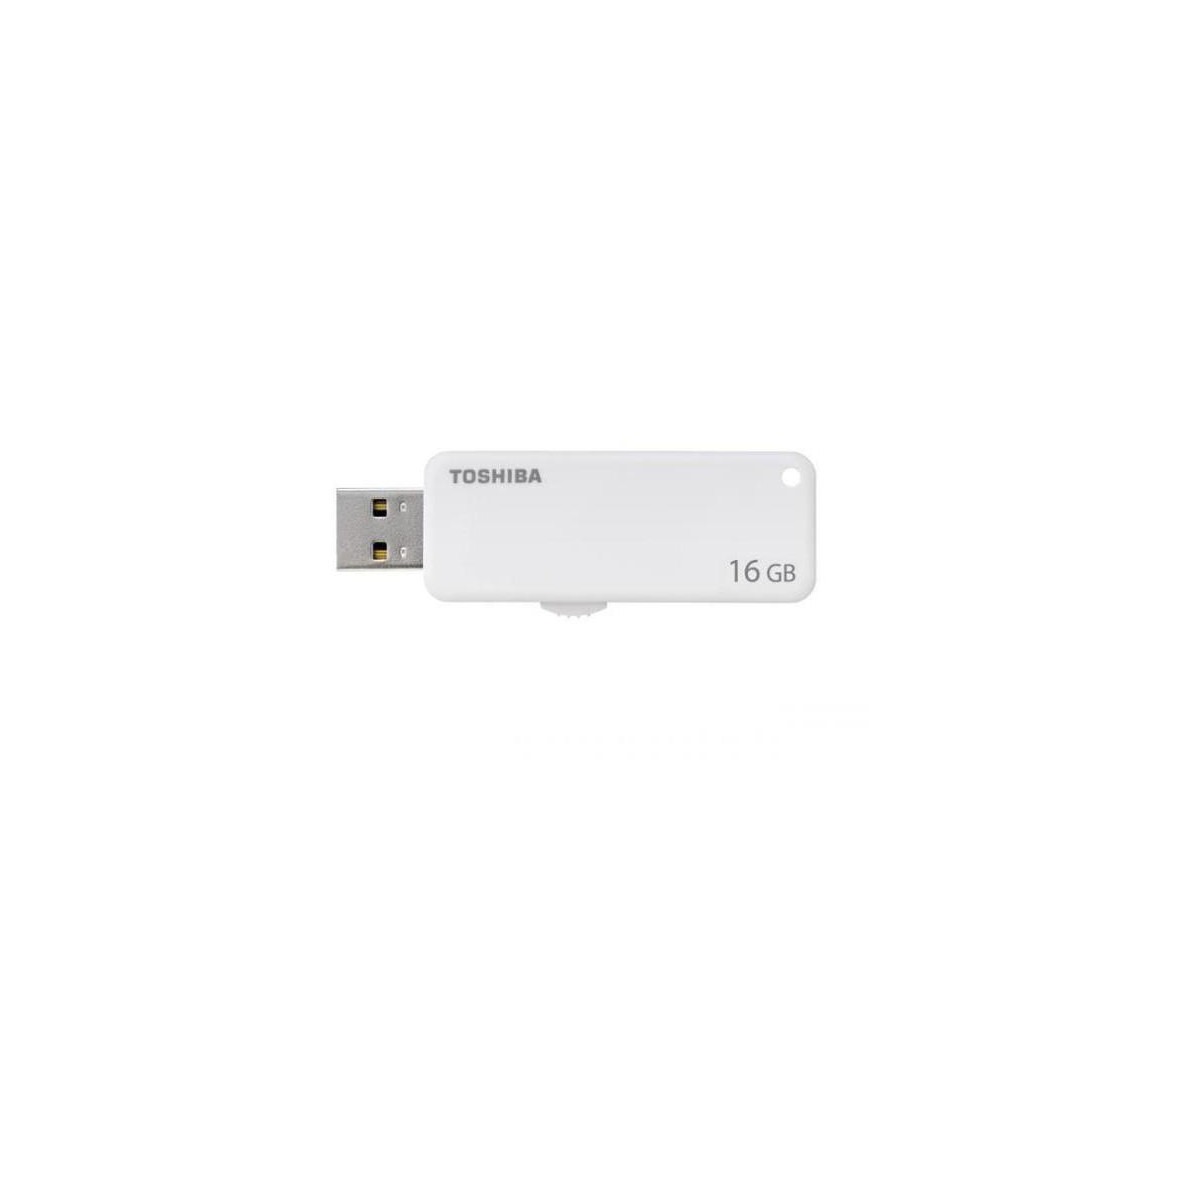 More about Flash Disk TOSHIBA 16GB USB 2.0